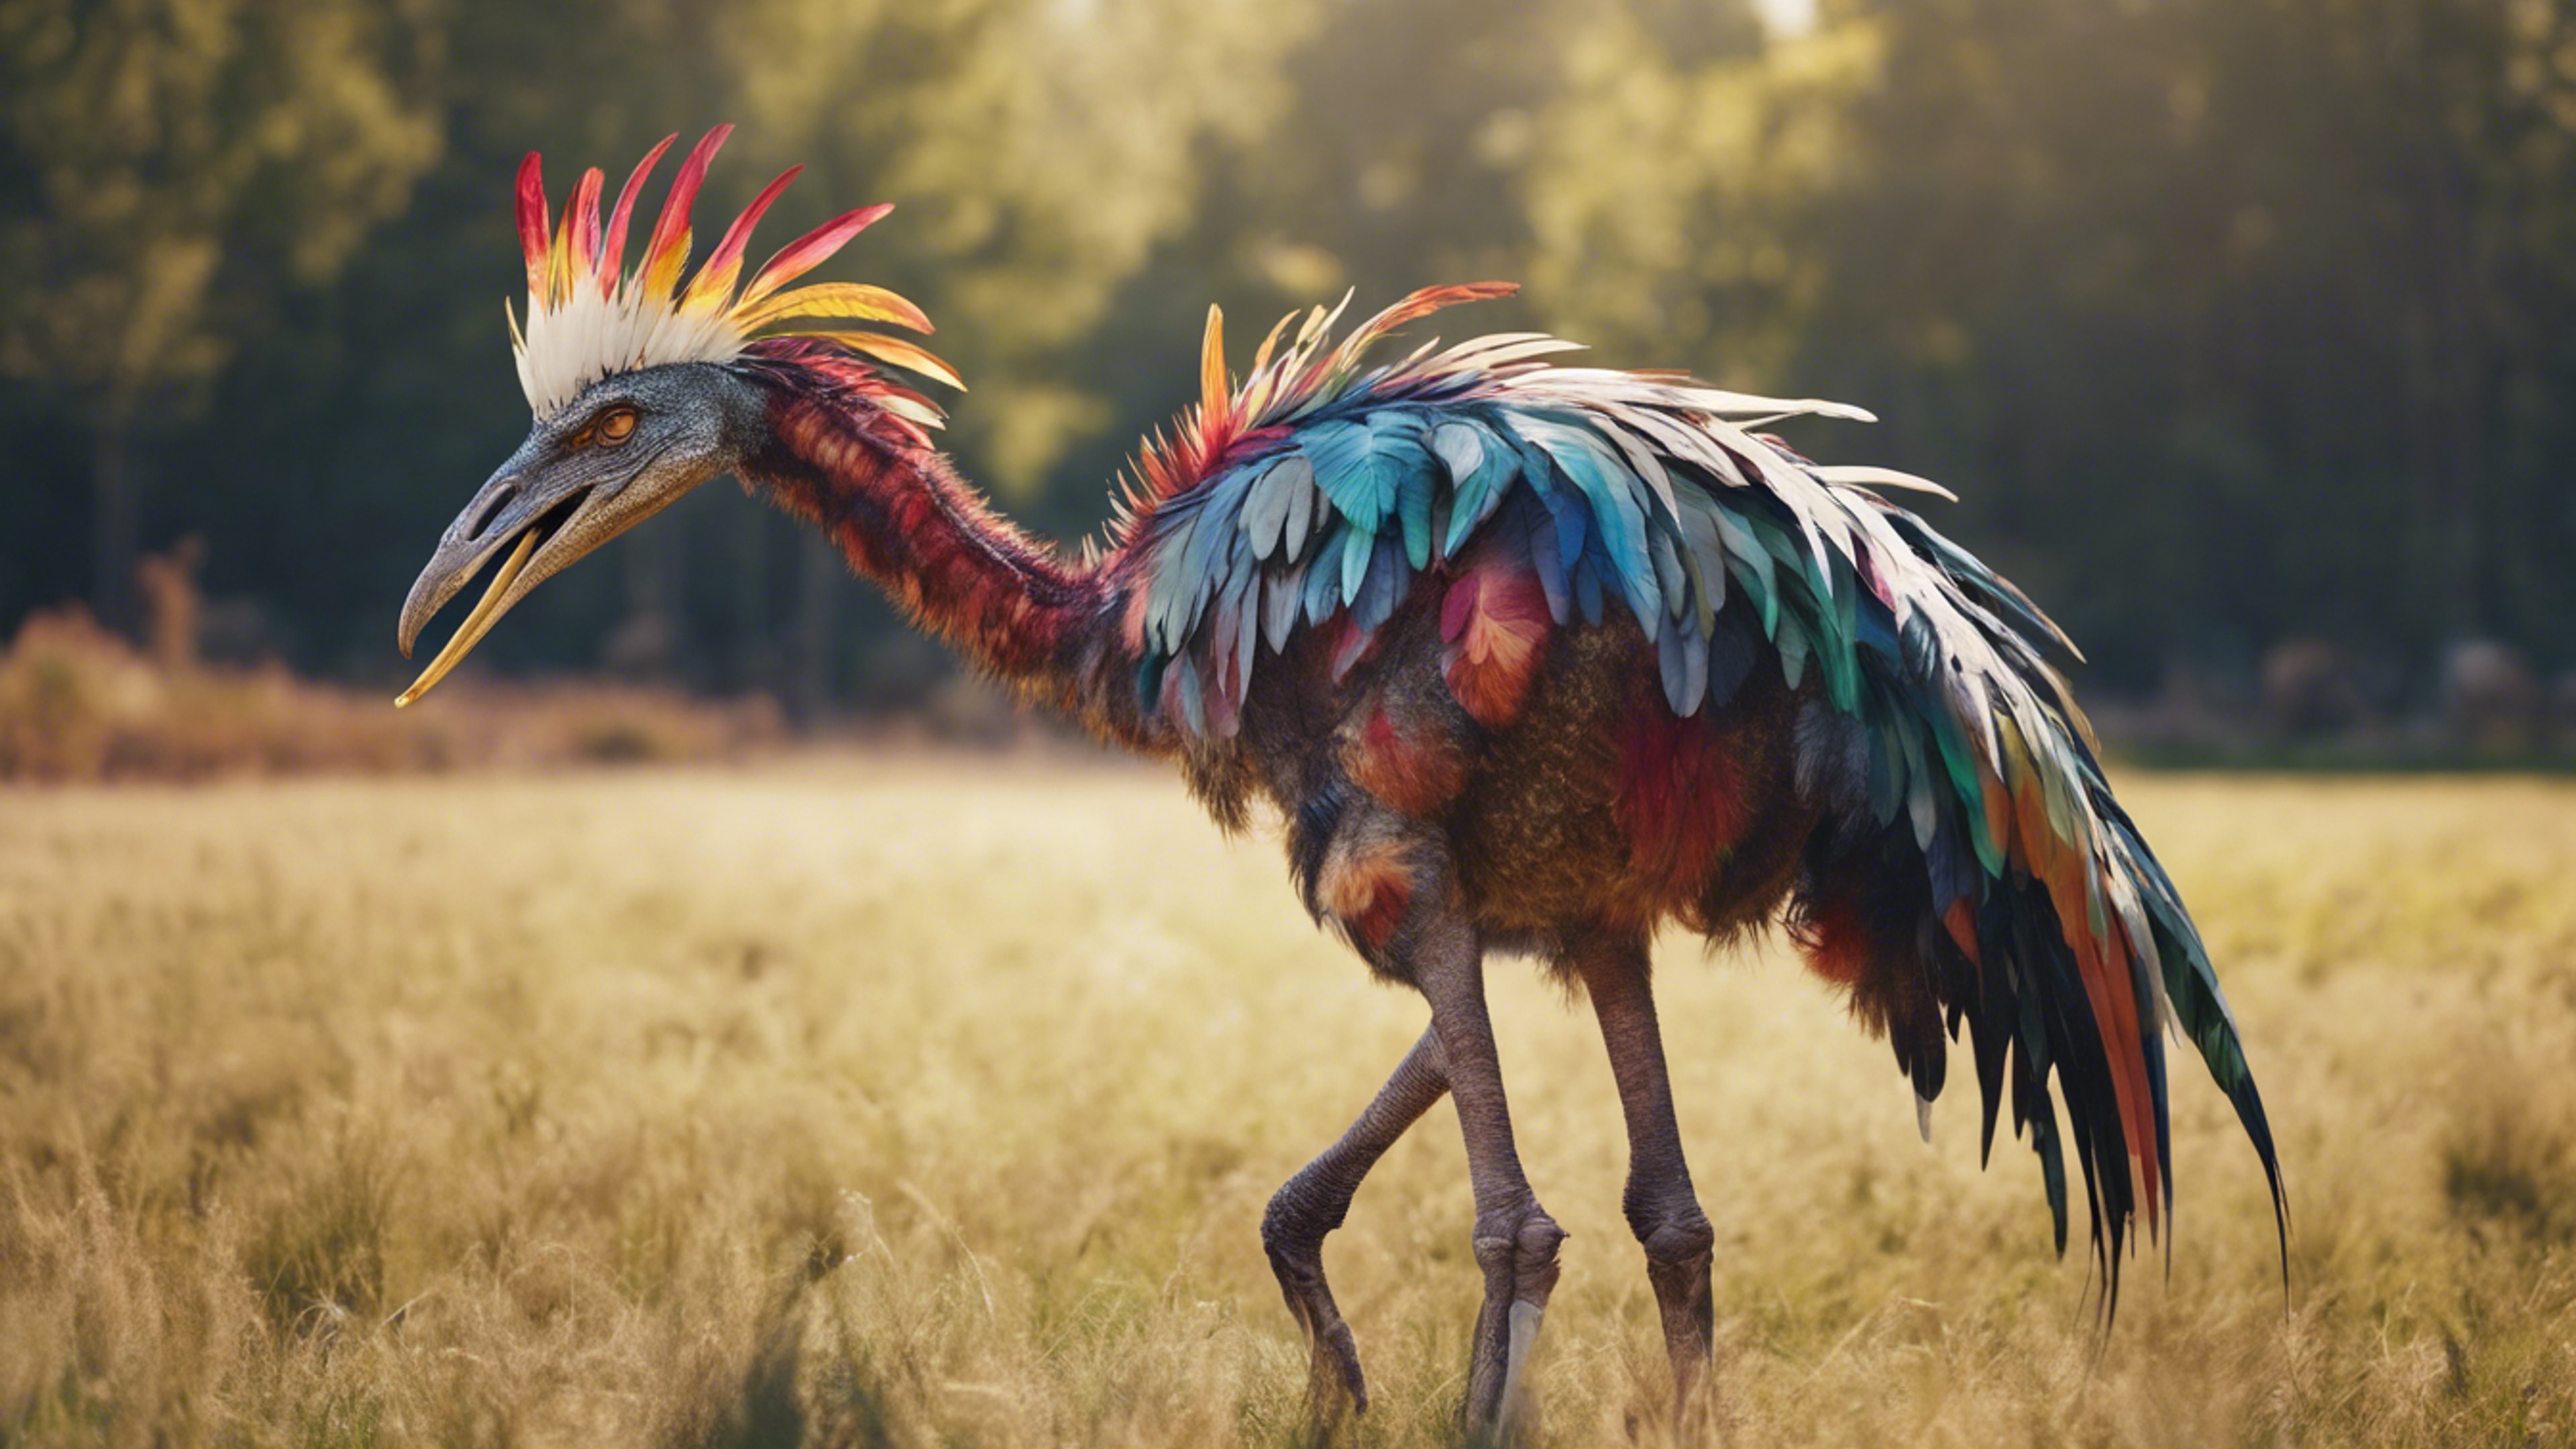 A Struthiomimus with colorful feathers prancing around in an open meadow. Papel de parede[bbeb240df8e5485aba58]